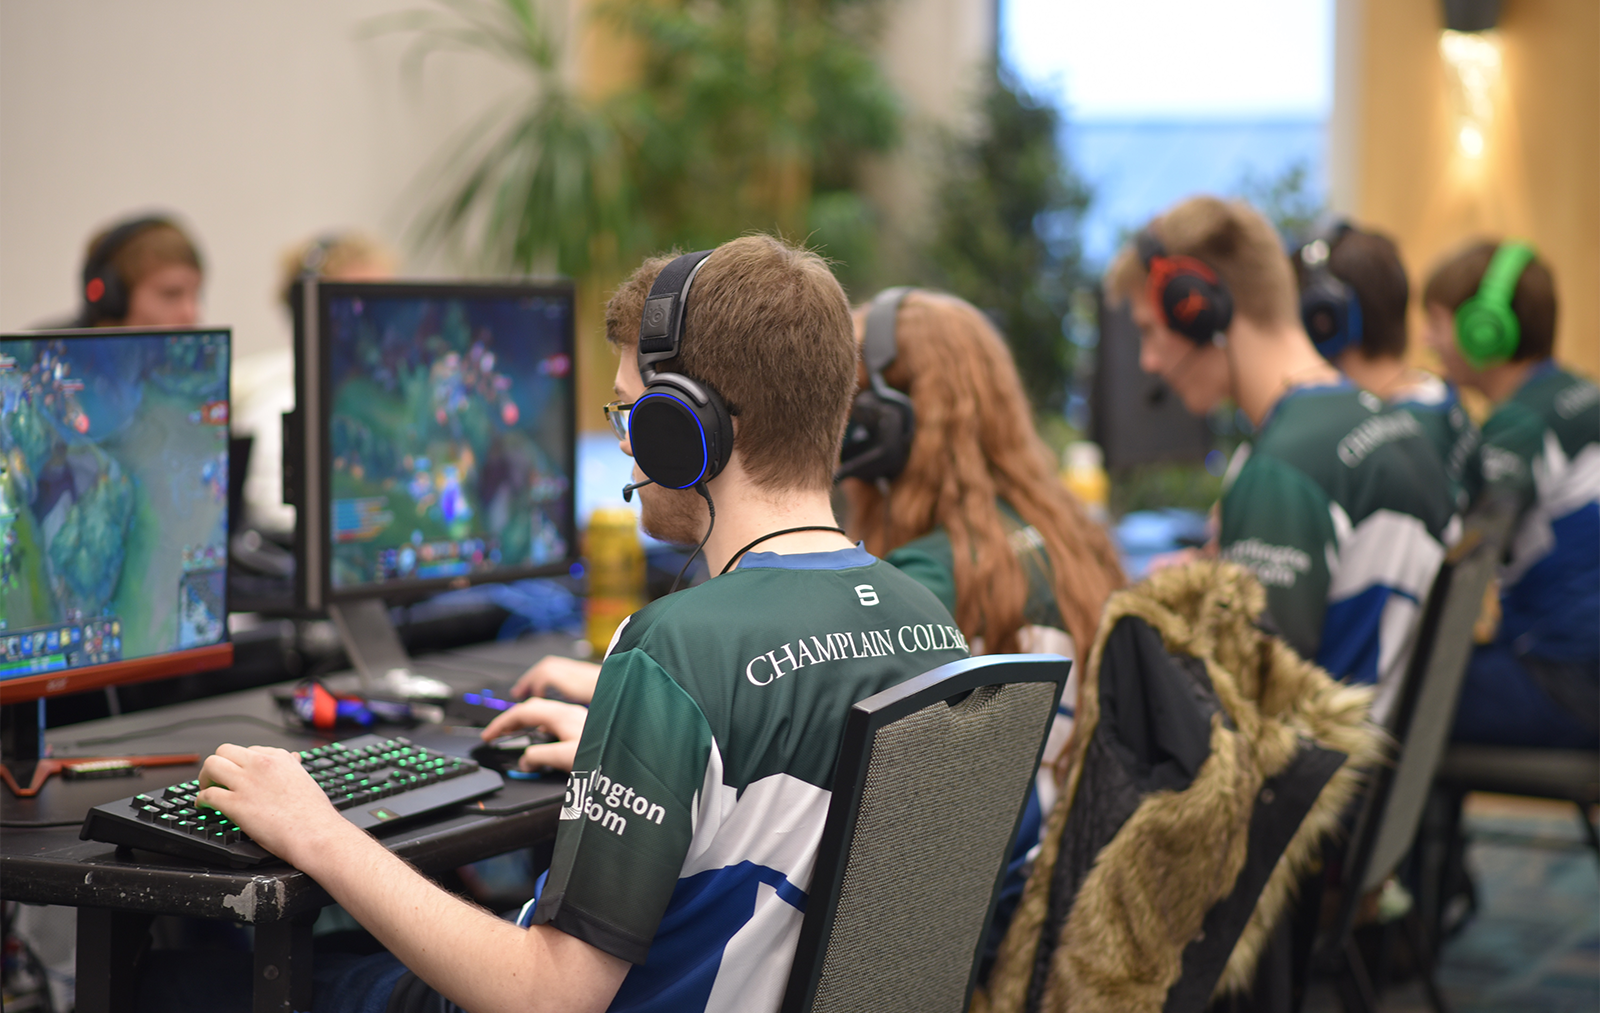 Group of students wearing team uniforms playing Esports games